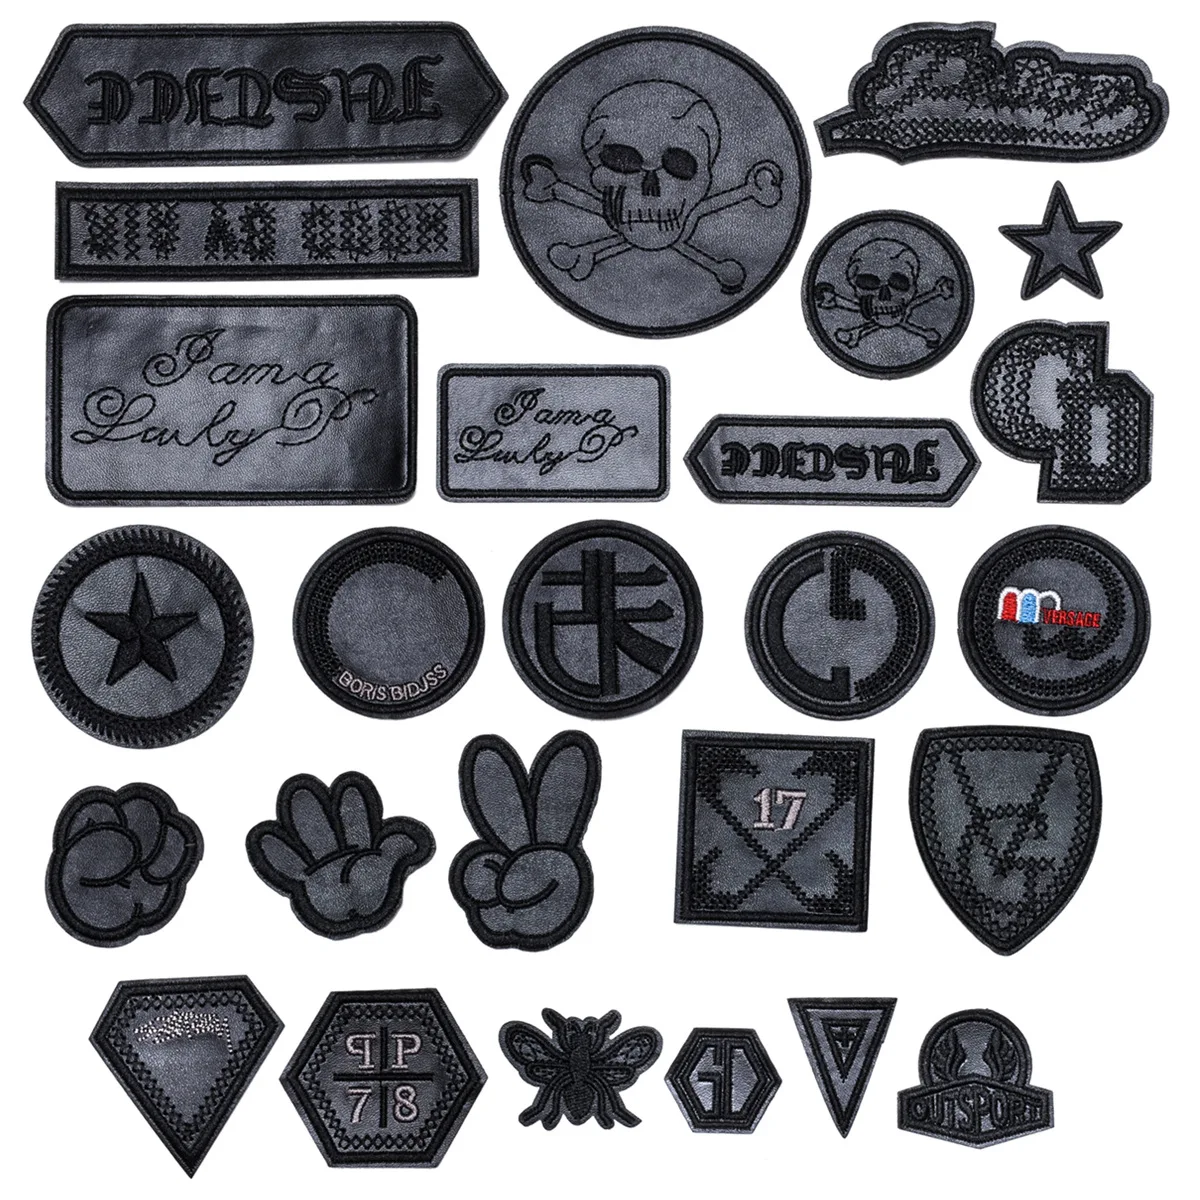 

26Pcs Black PU Leather Ironing On Patches Yeah Star Stripe Stickers Embroidered for Clothes hat Pants Bag Appliques decor Badge